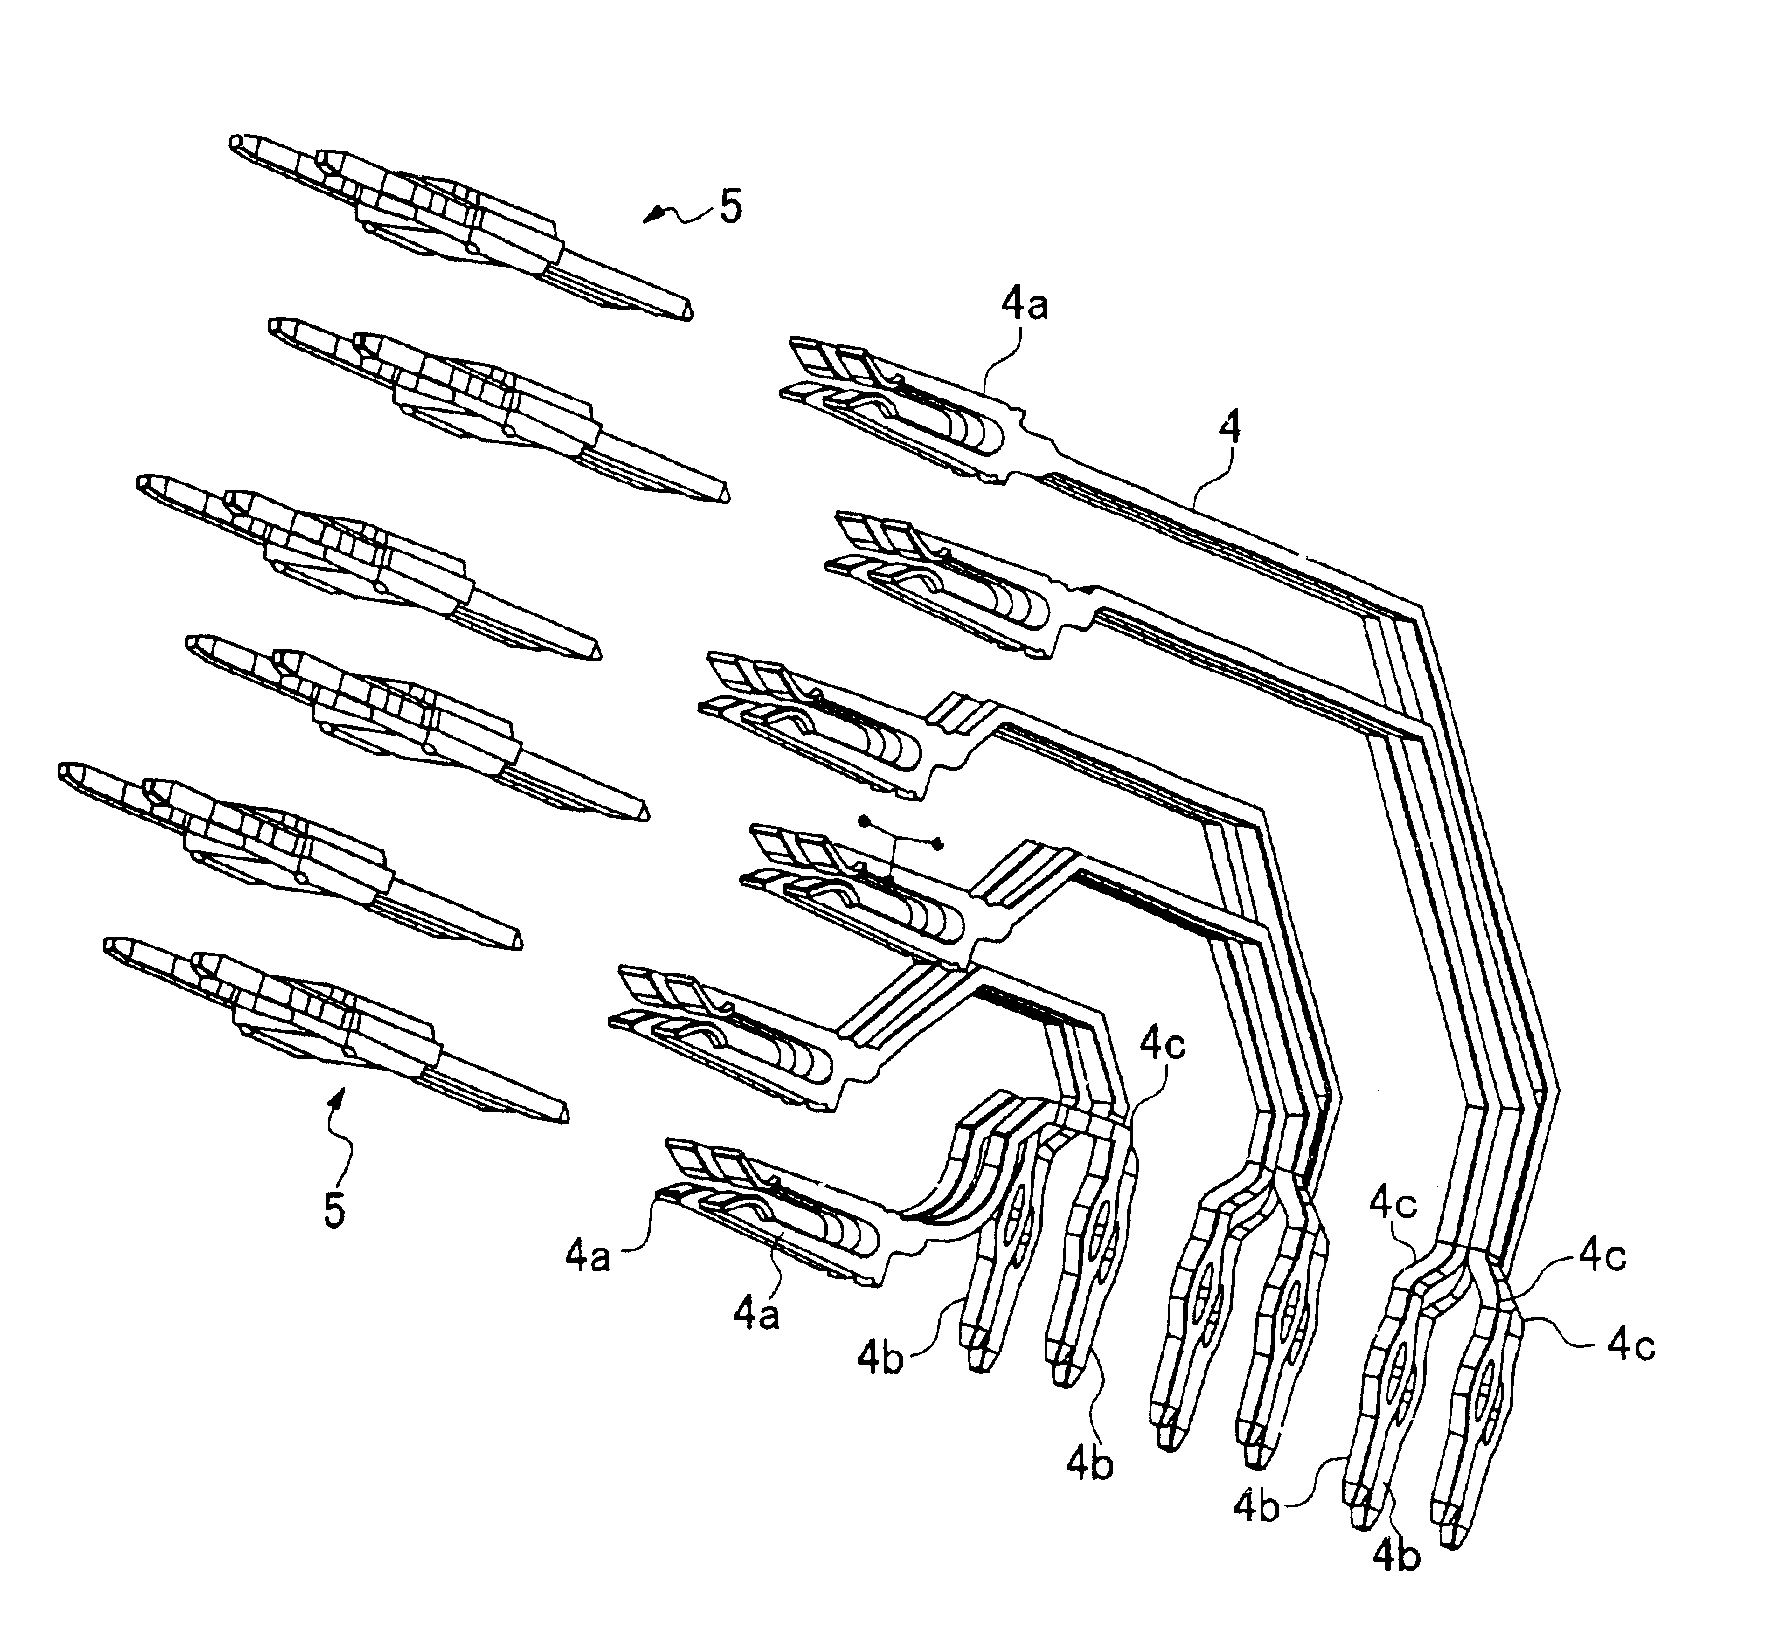 High-frequency electric connector having no ground terminals